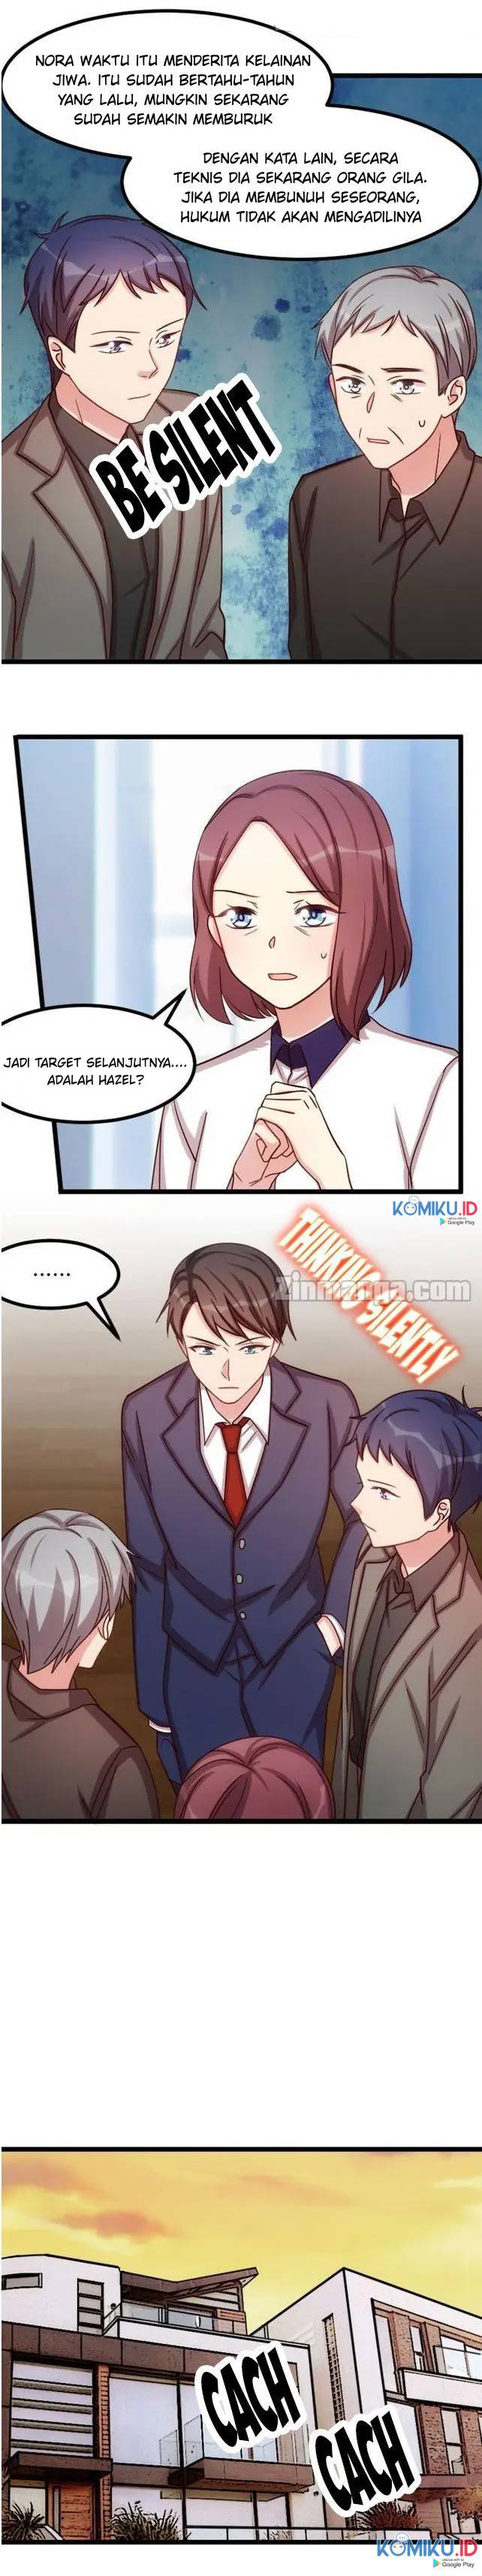 CEO’s Sudden Proposal Chapter 206 5